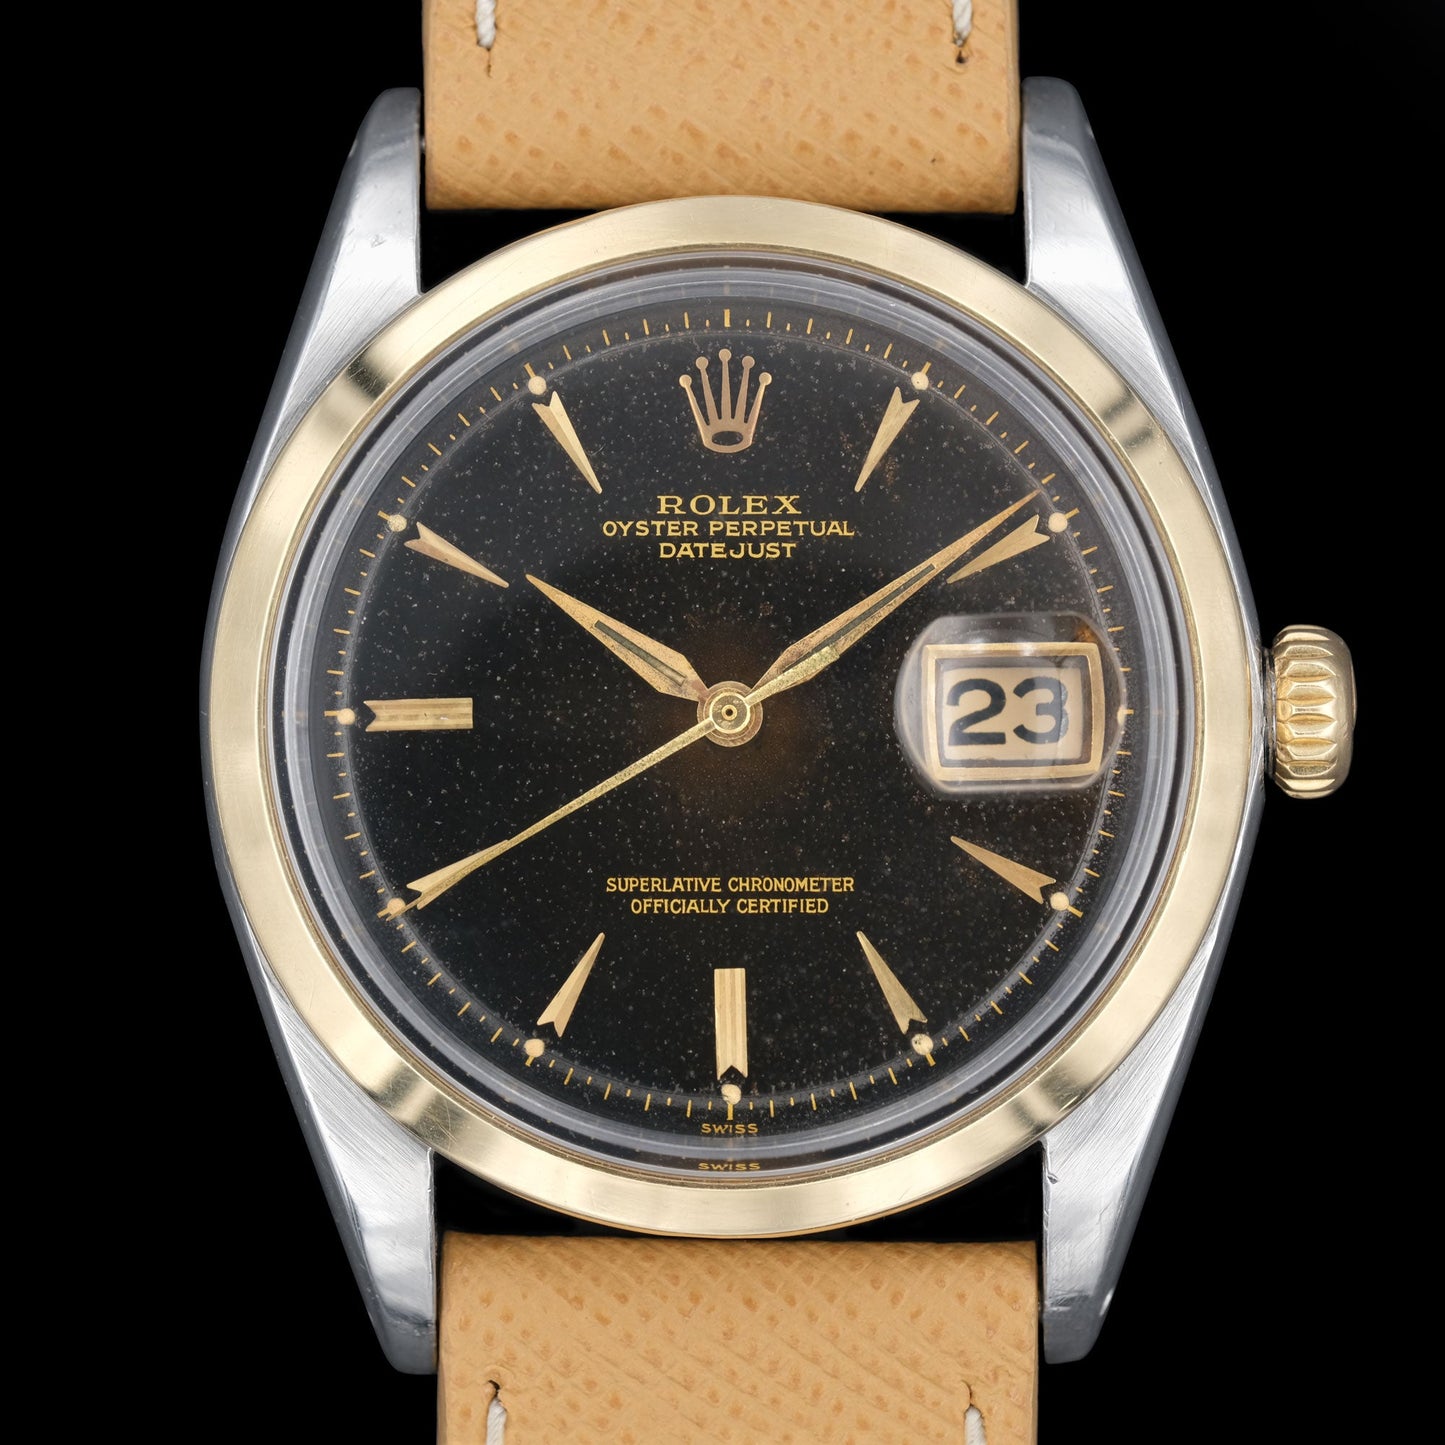 Rolex Datejust ref.1600 Gilt Tropical dial from 1964